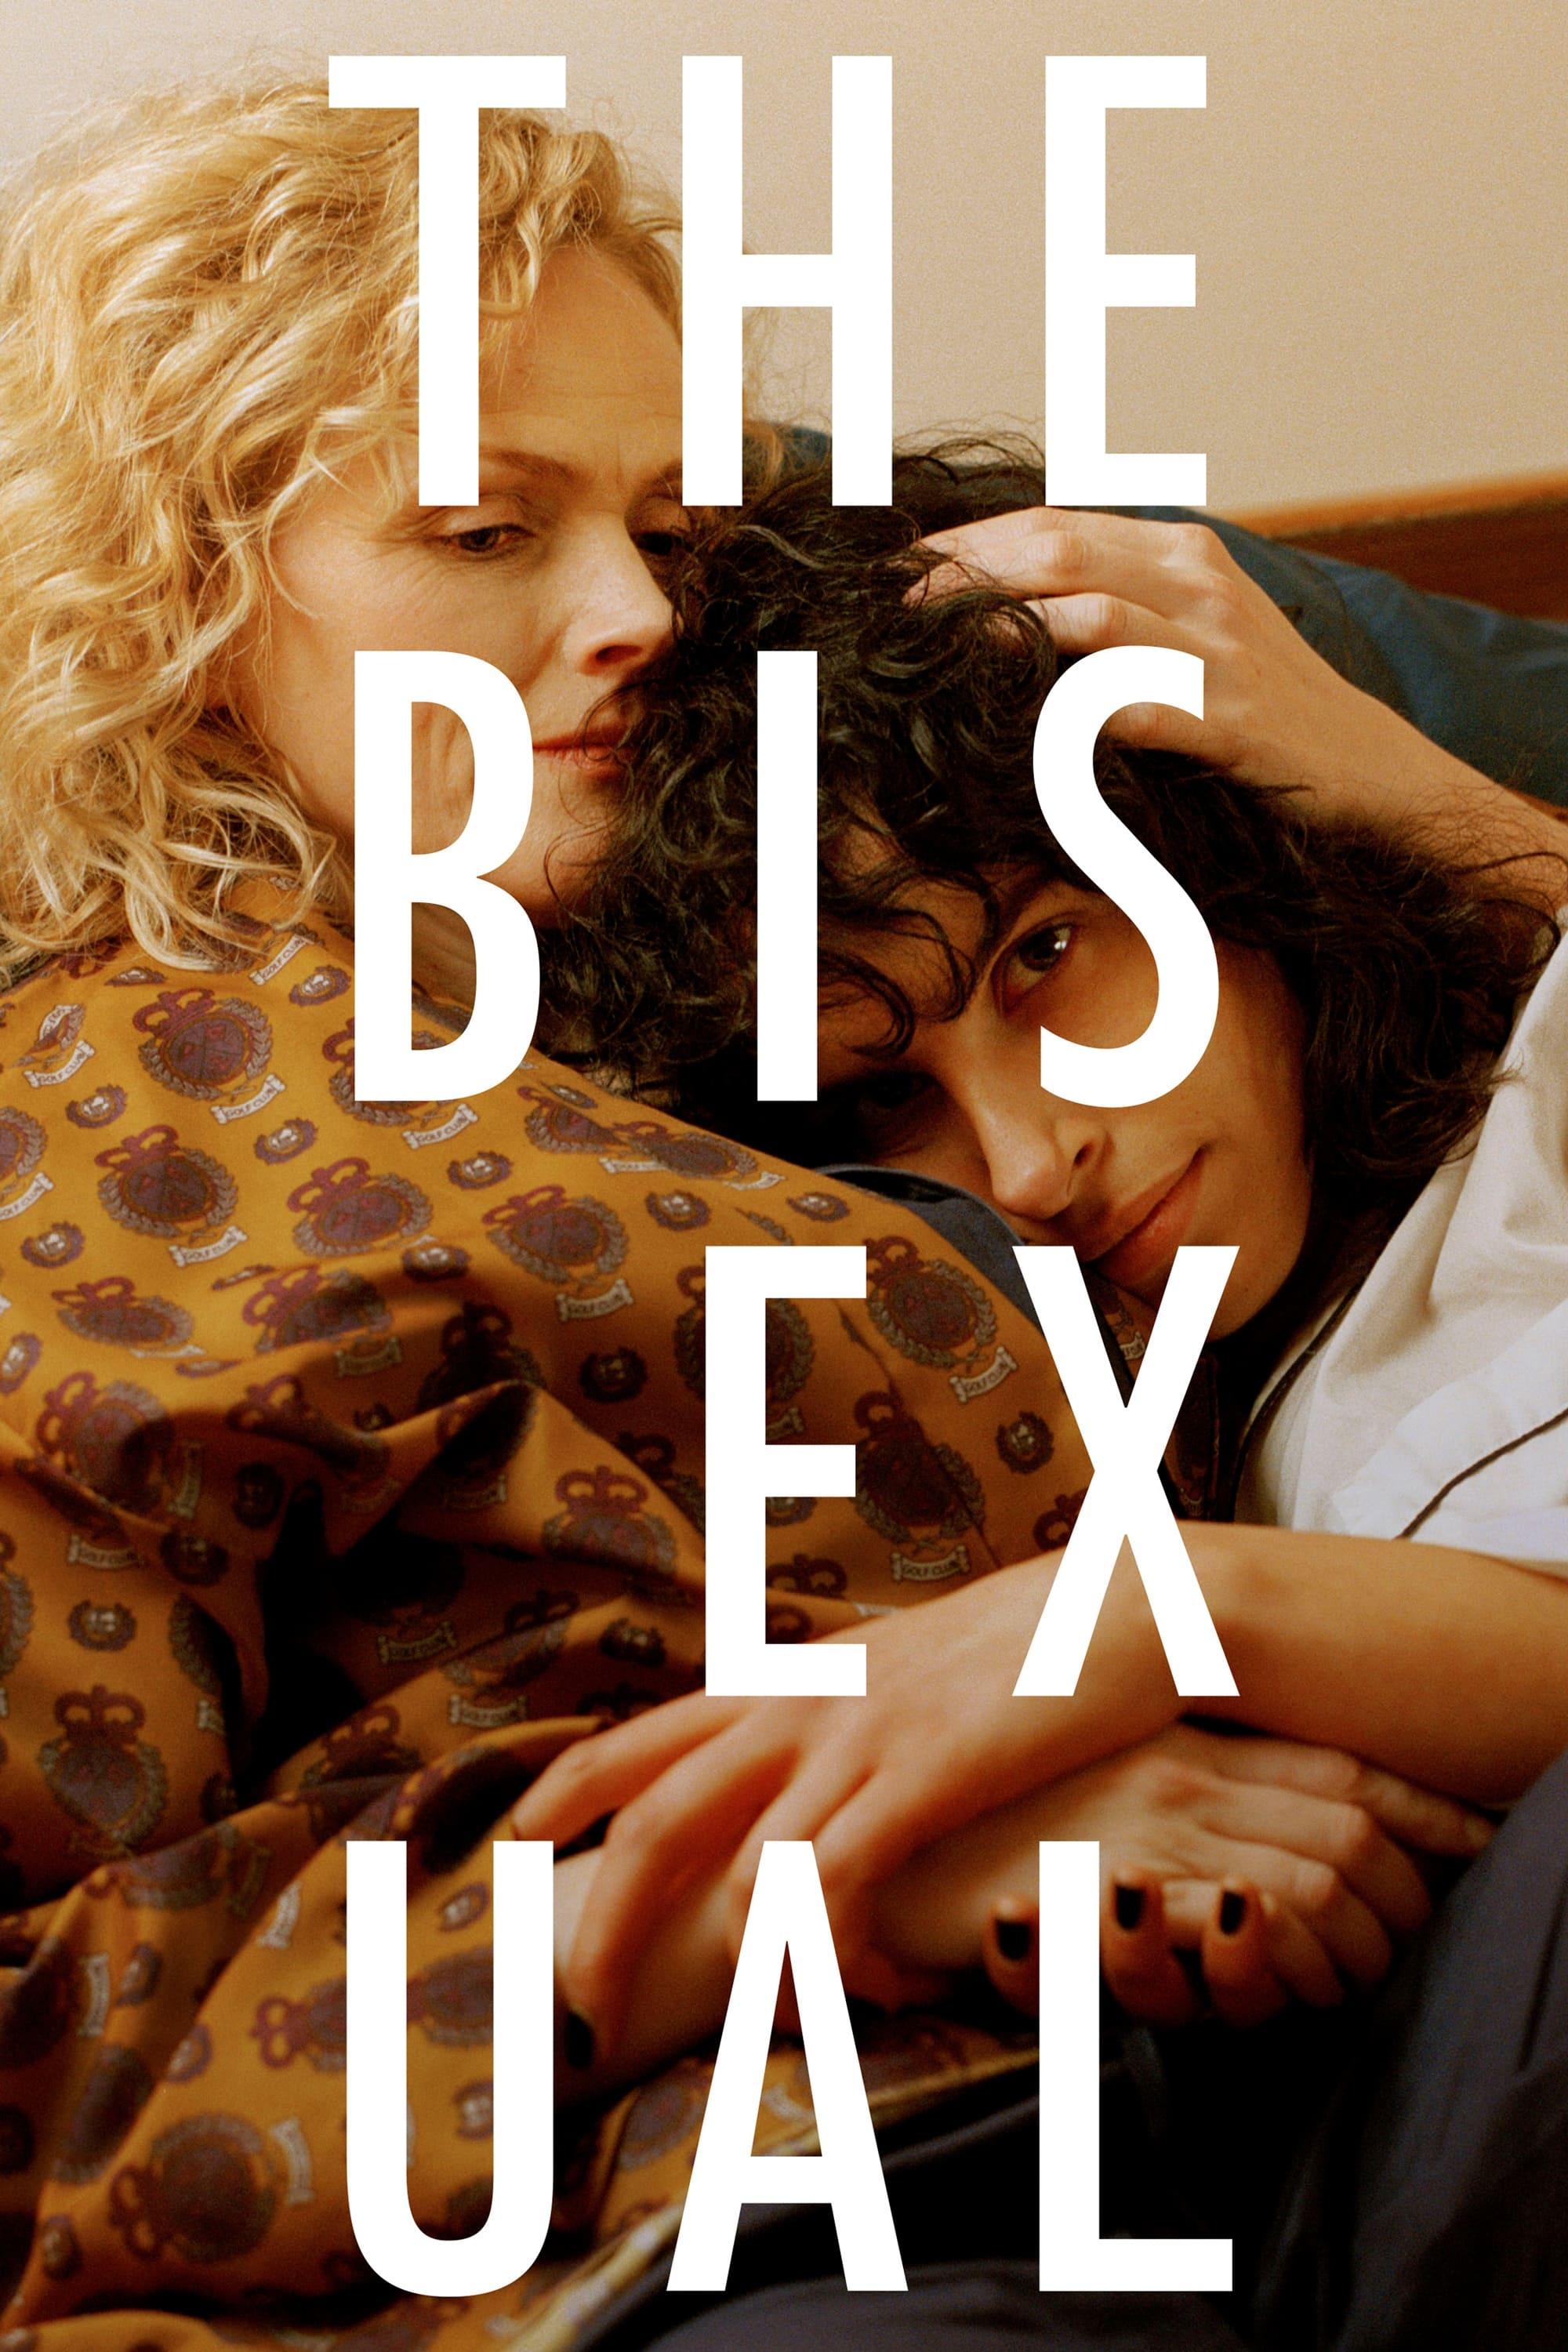 The Bisexual poster